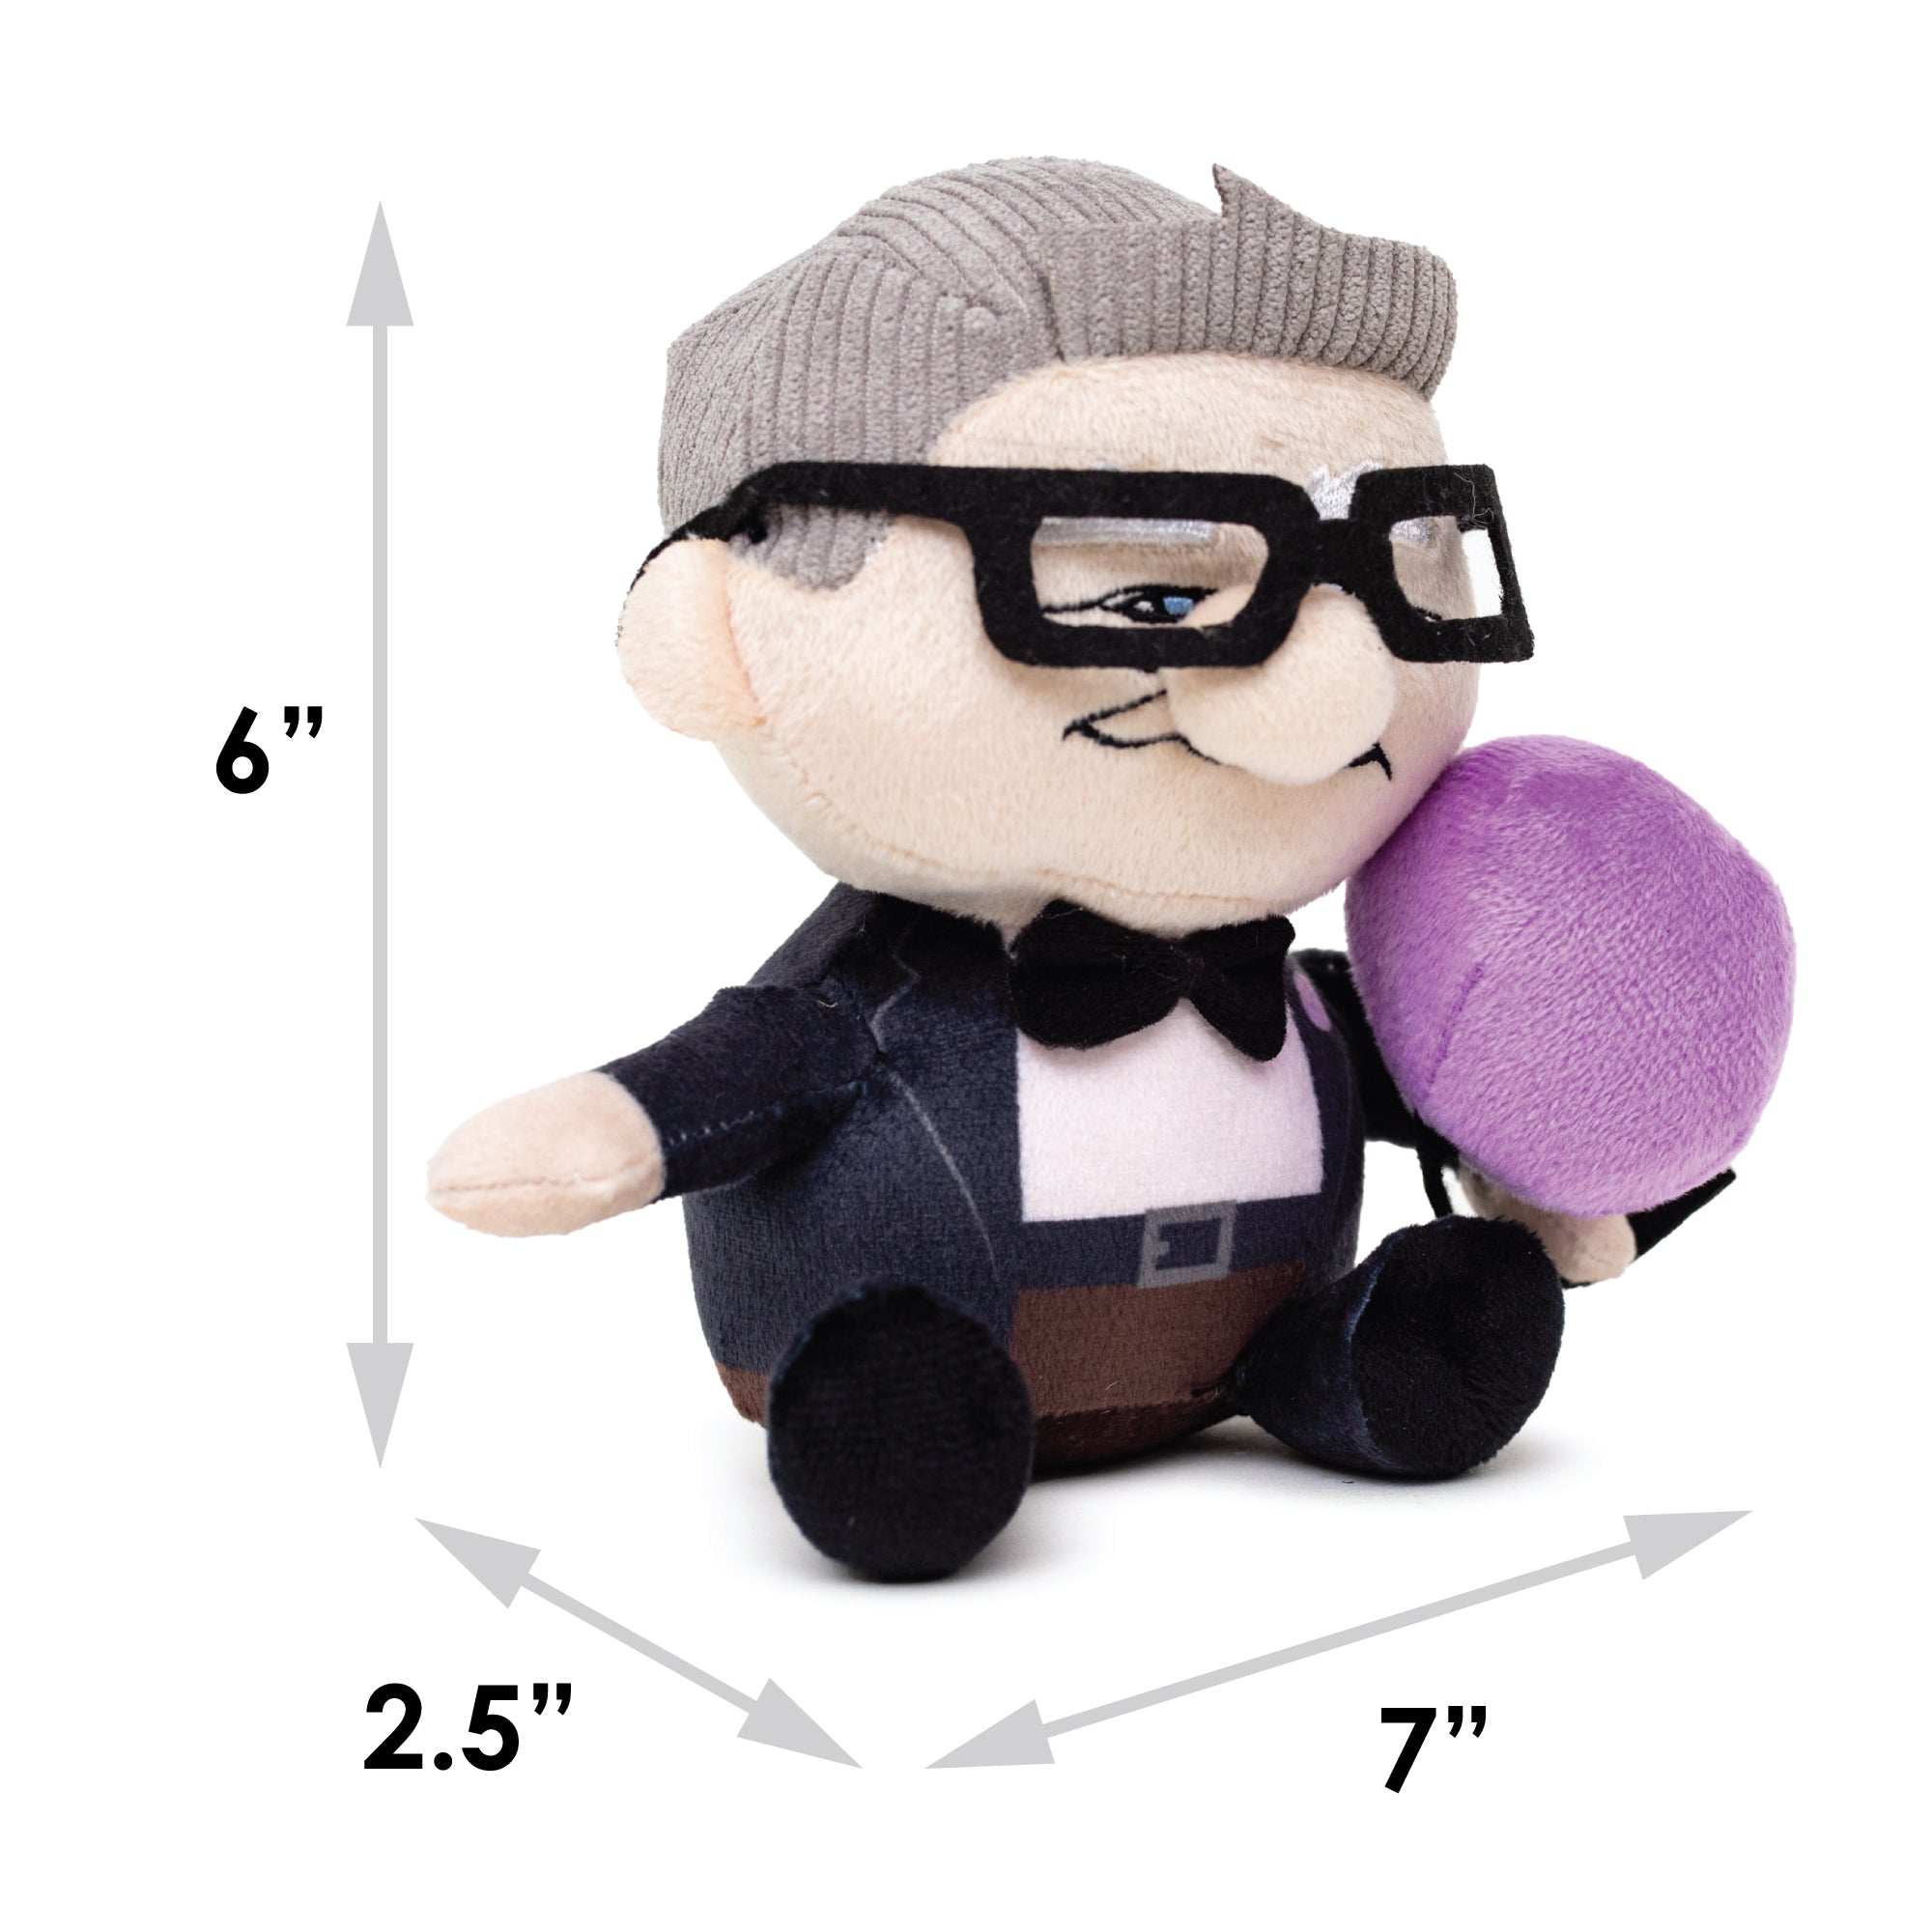 Dog Toy Squeaker Plush - Up Carl with Balloon Sitting Pose